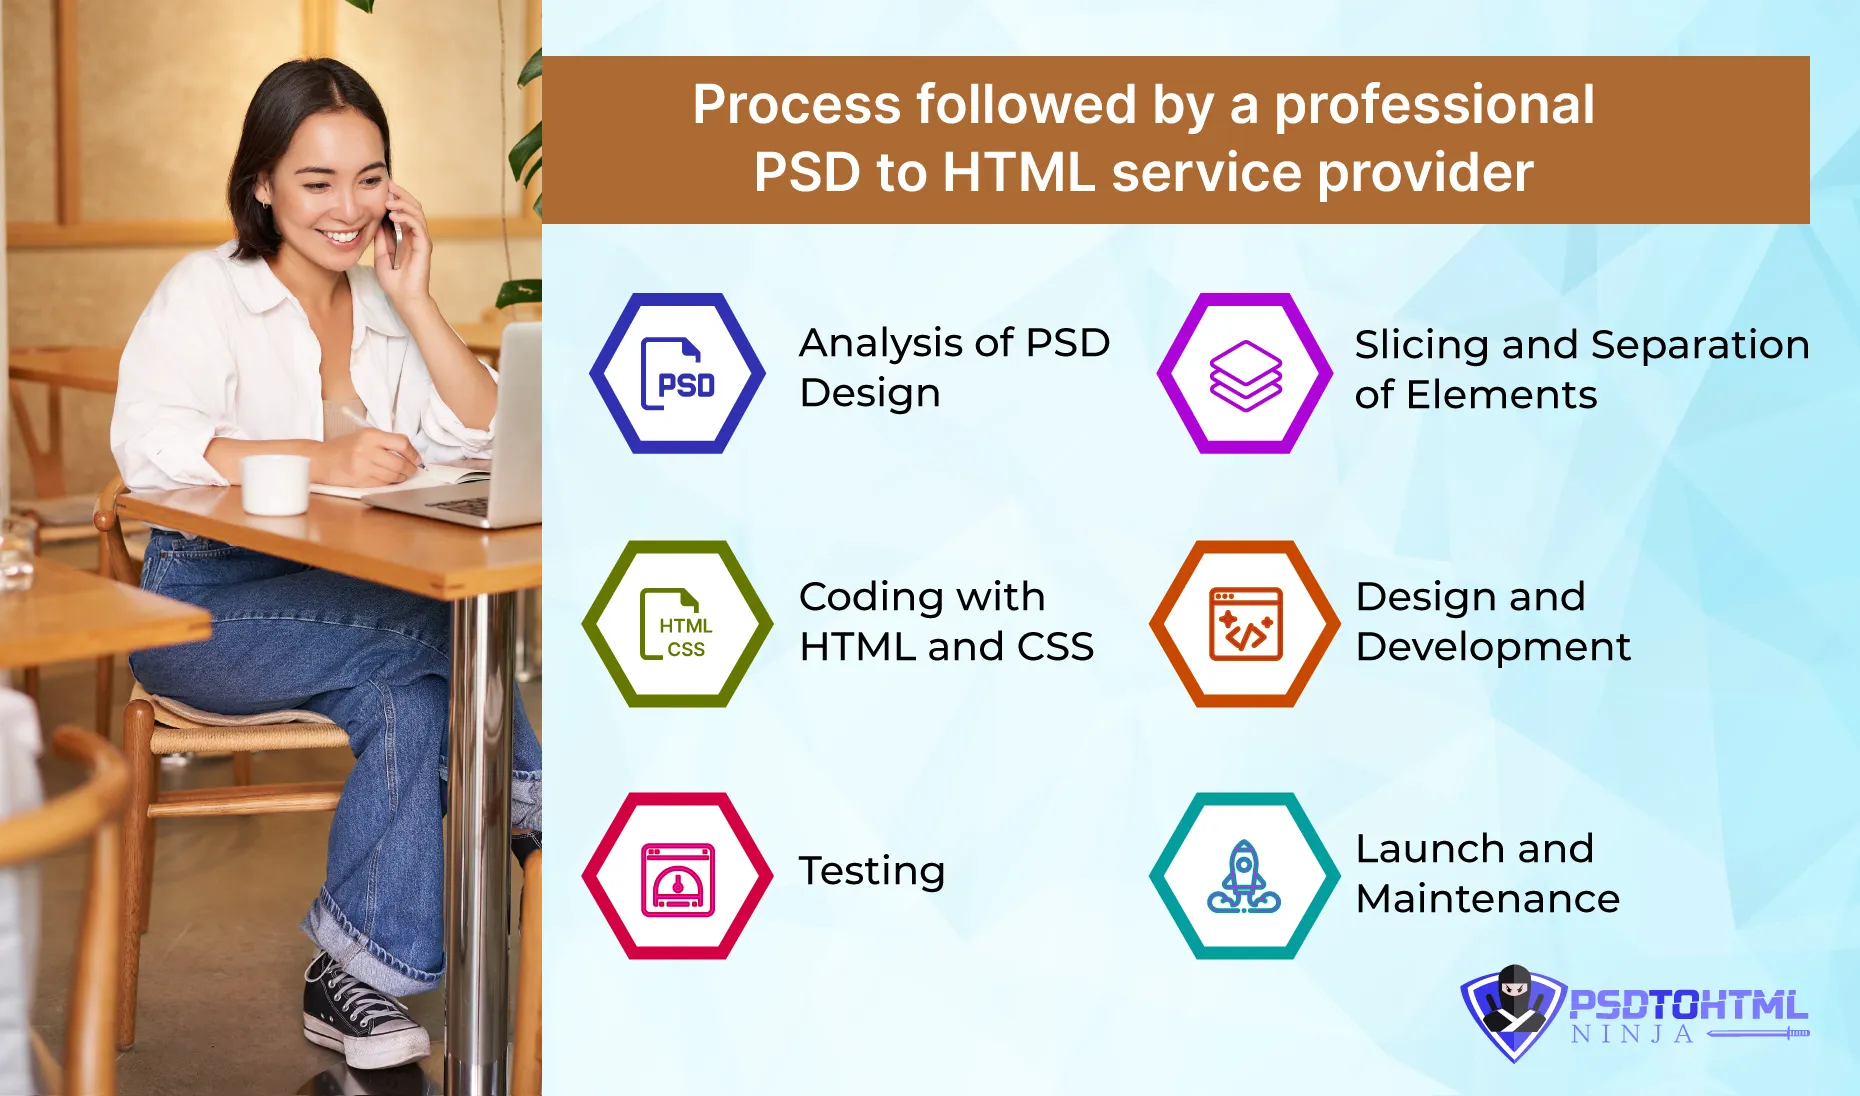 Process followed by a professional PSD to HTML service provider